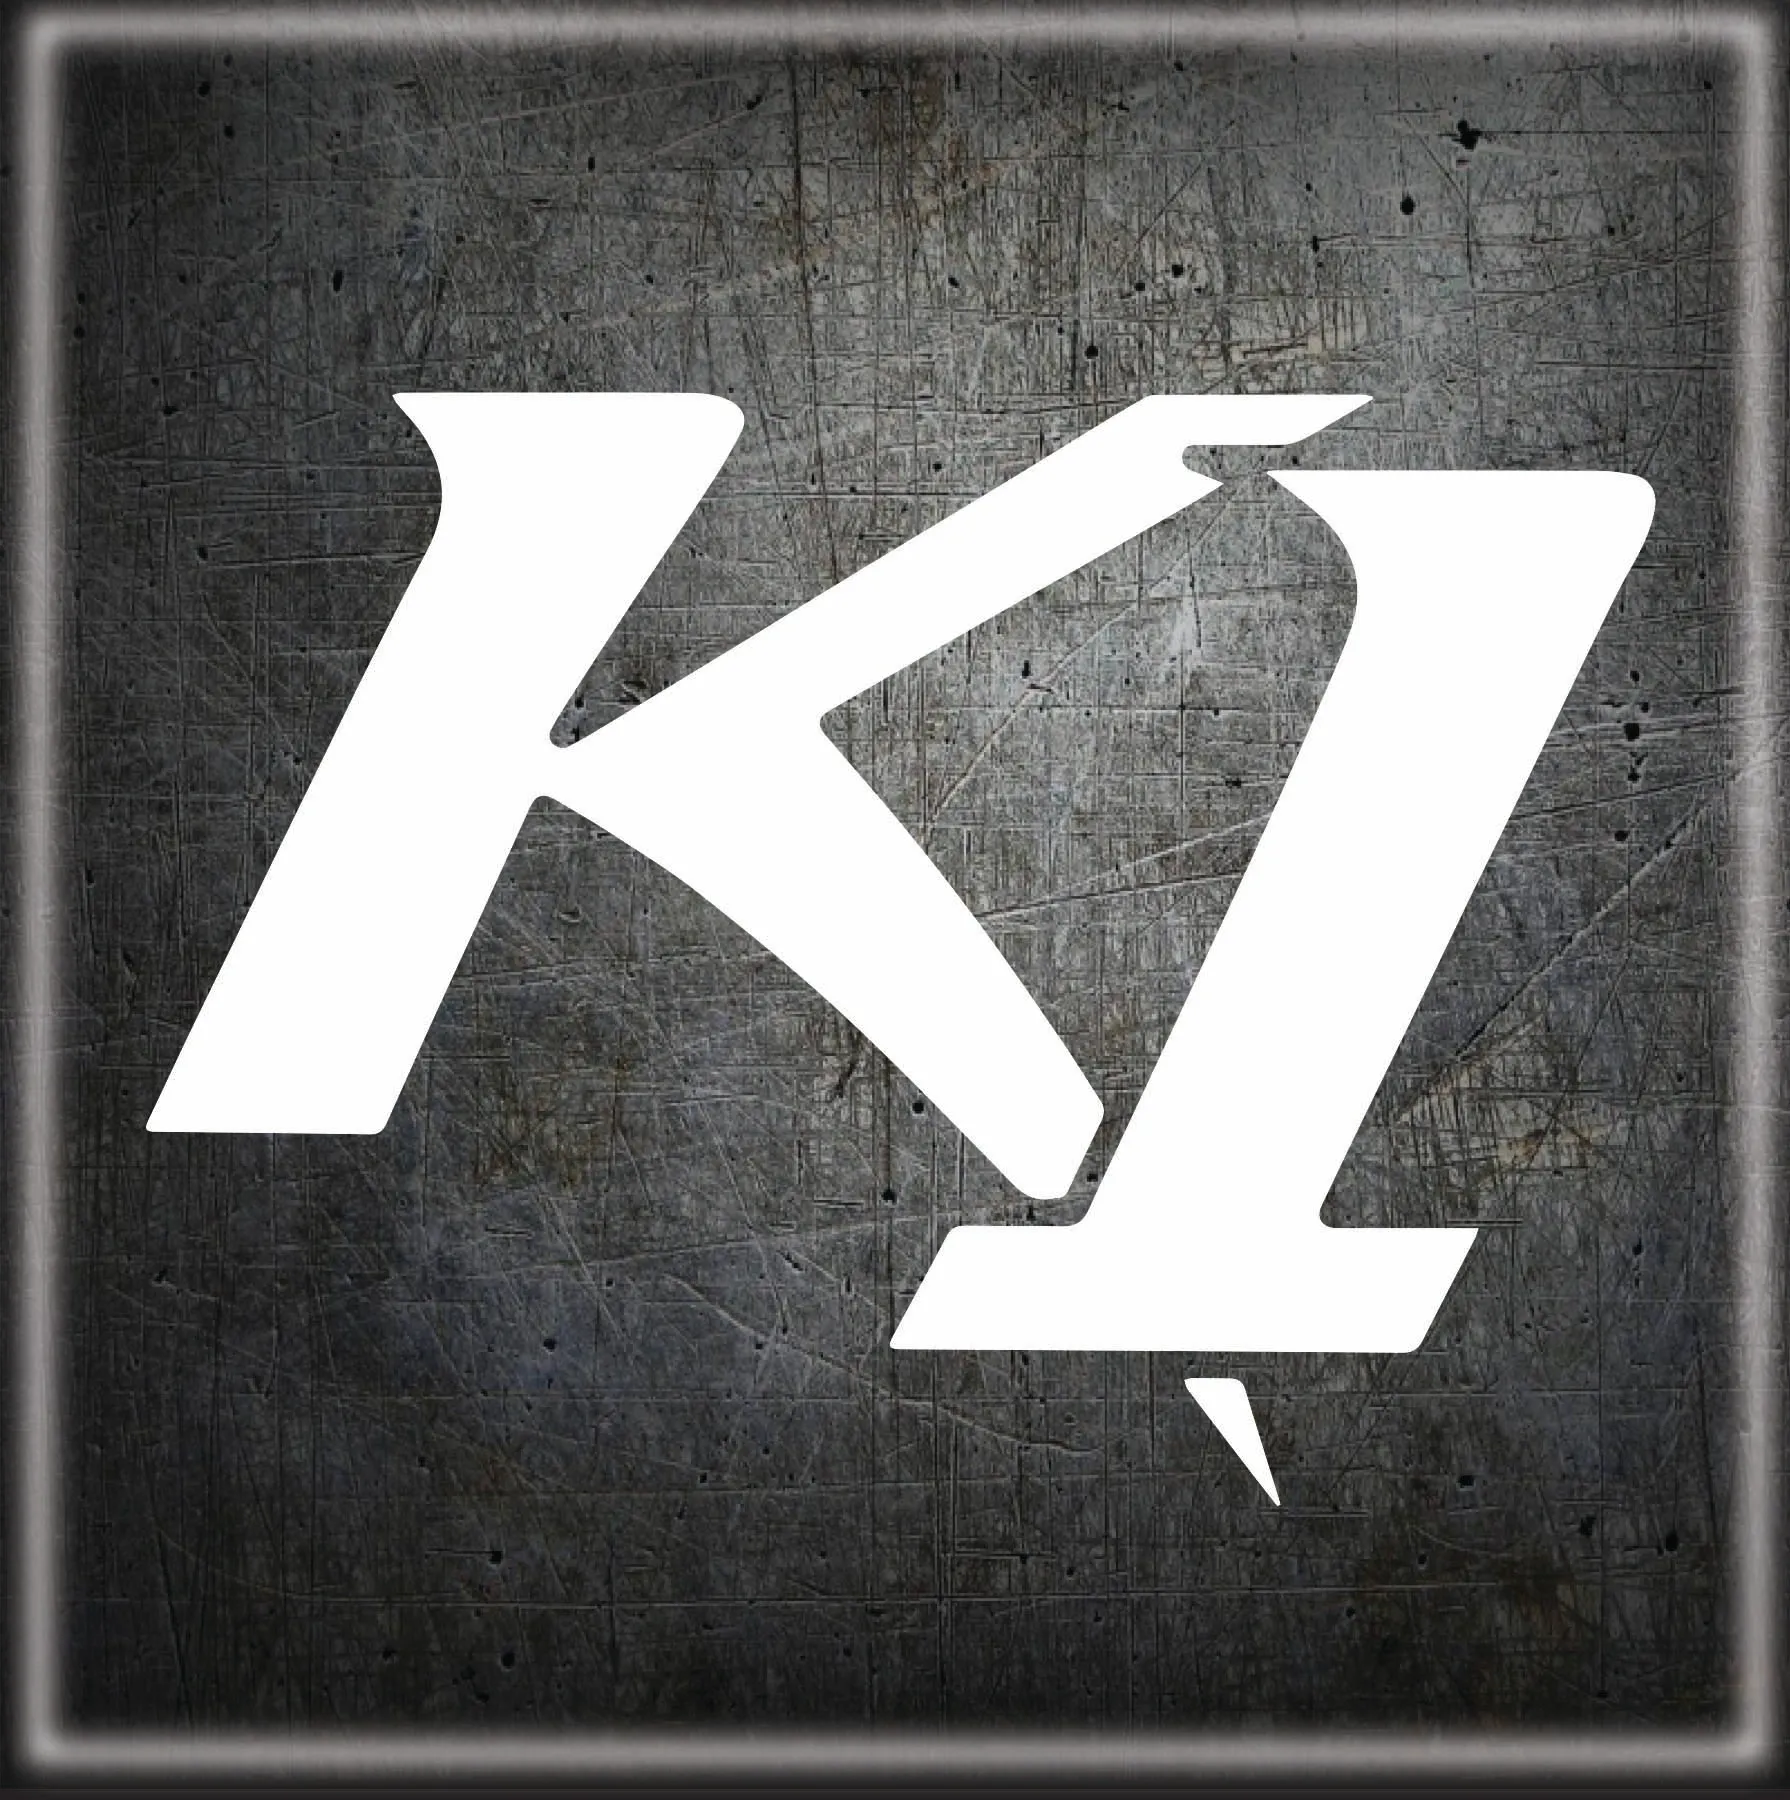 A picture of the k 1 logo.